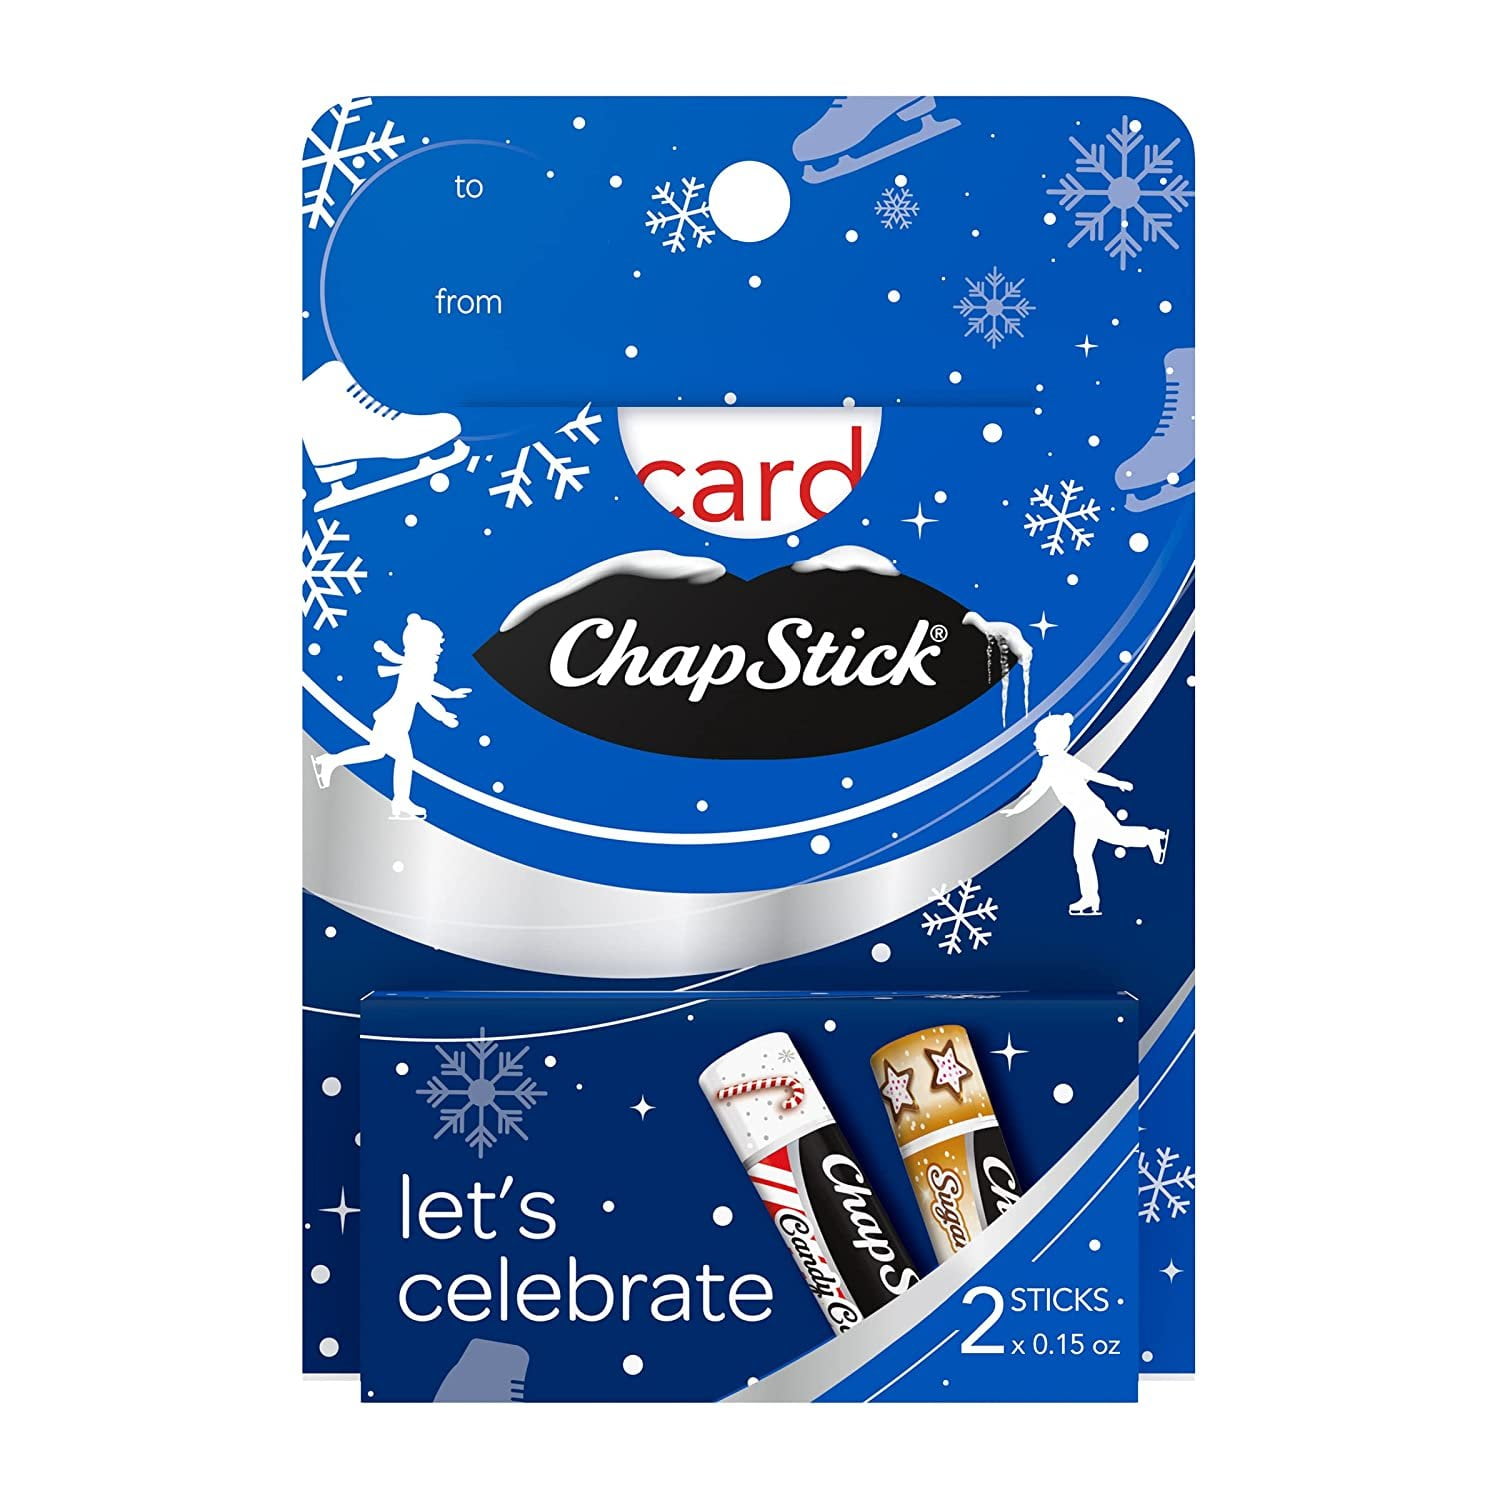 ChapStick Lets Celebrate Holiday Lip Balm Gift Card Holder - 0.15 Oz Pack  of 2